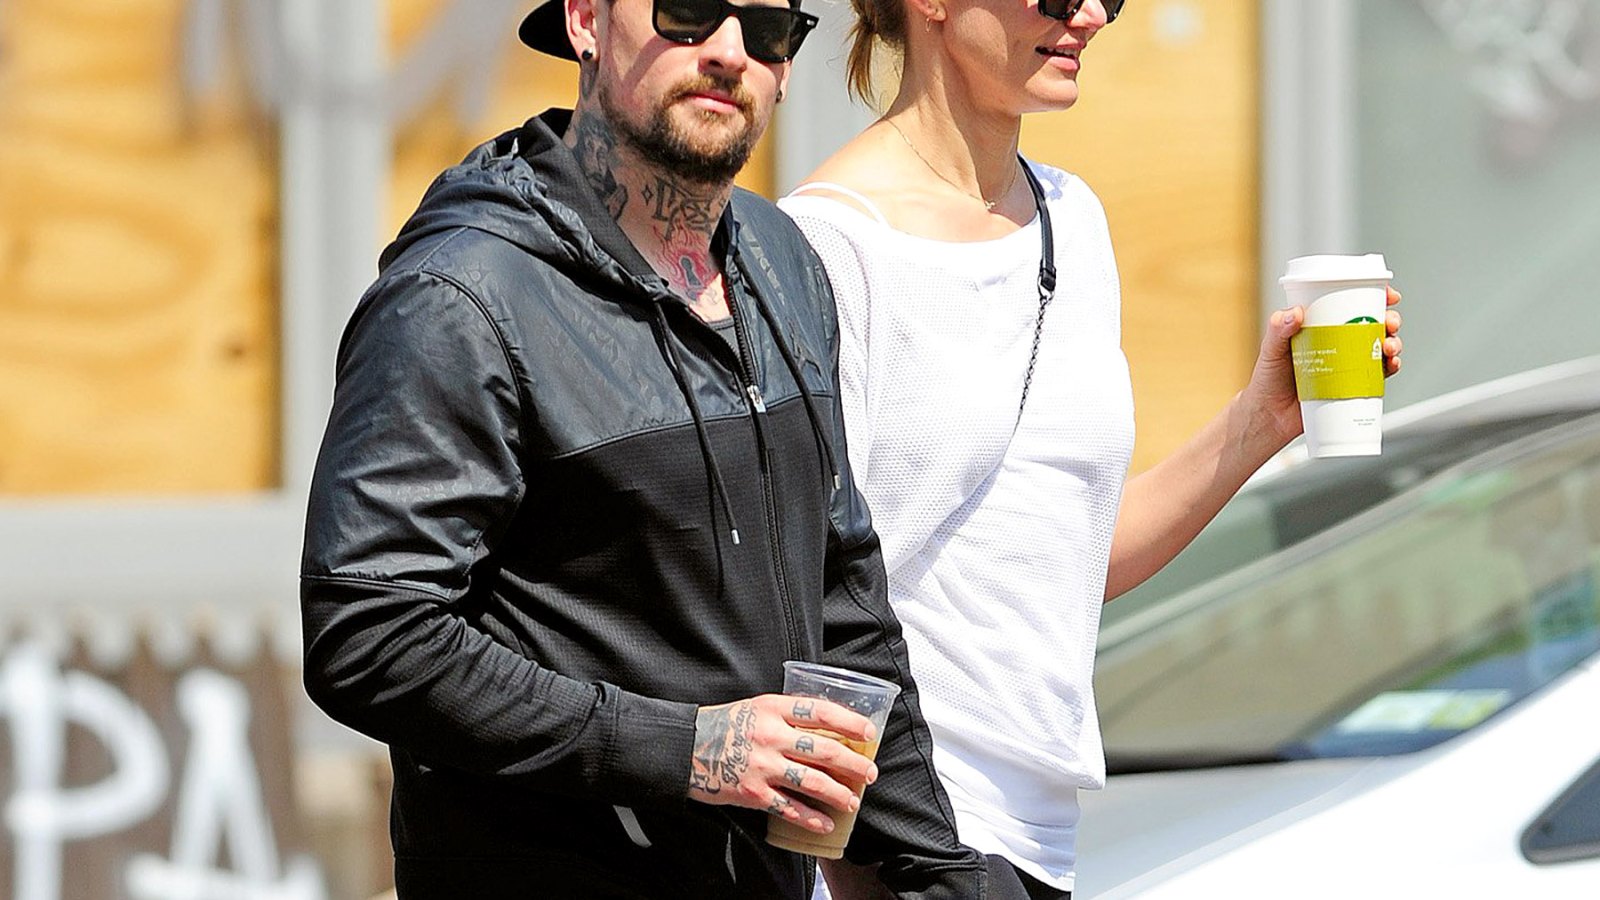 Benji Madden and Cameron Diaz hold hands in NYC on June 3, 2014